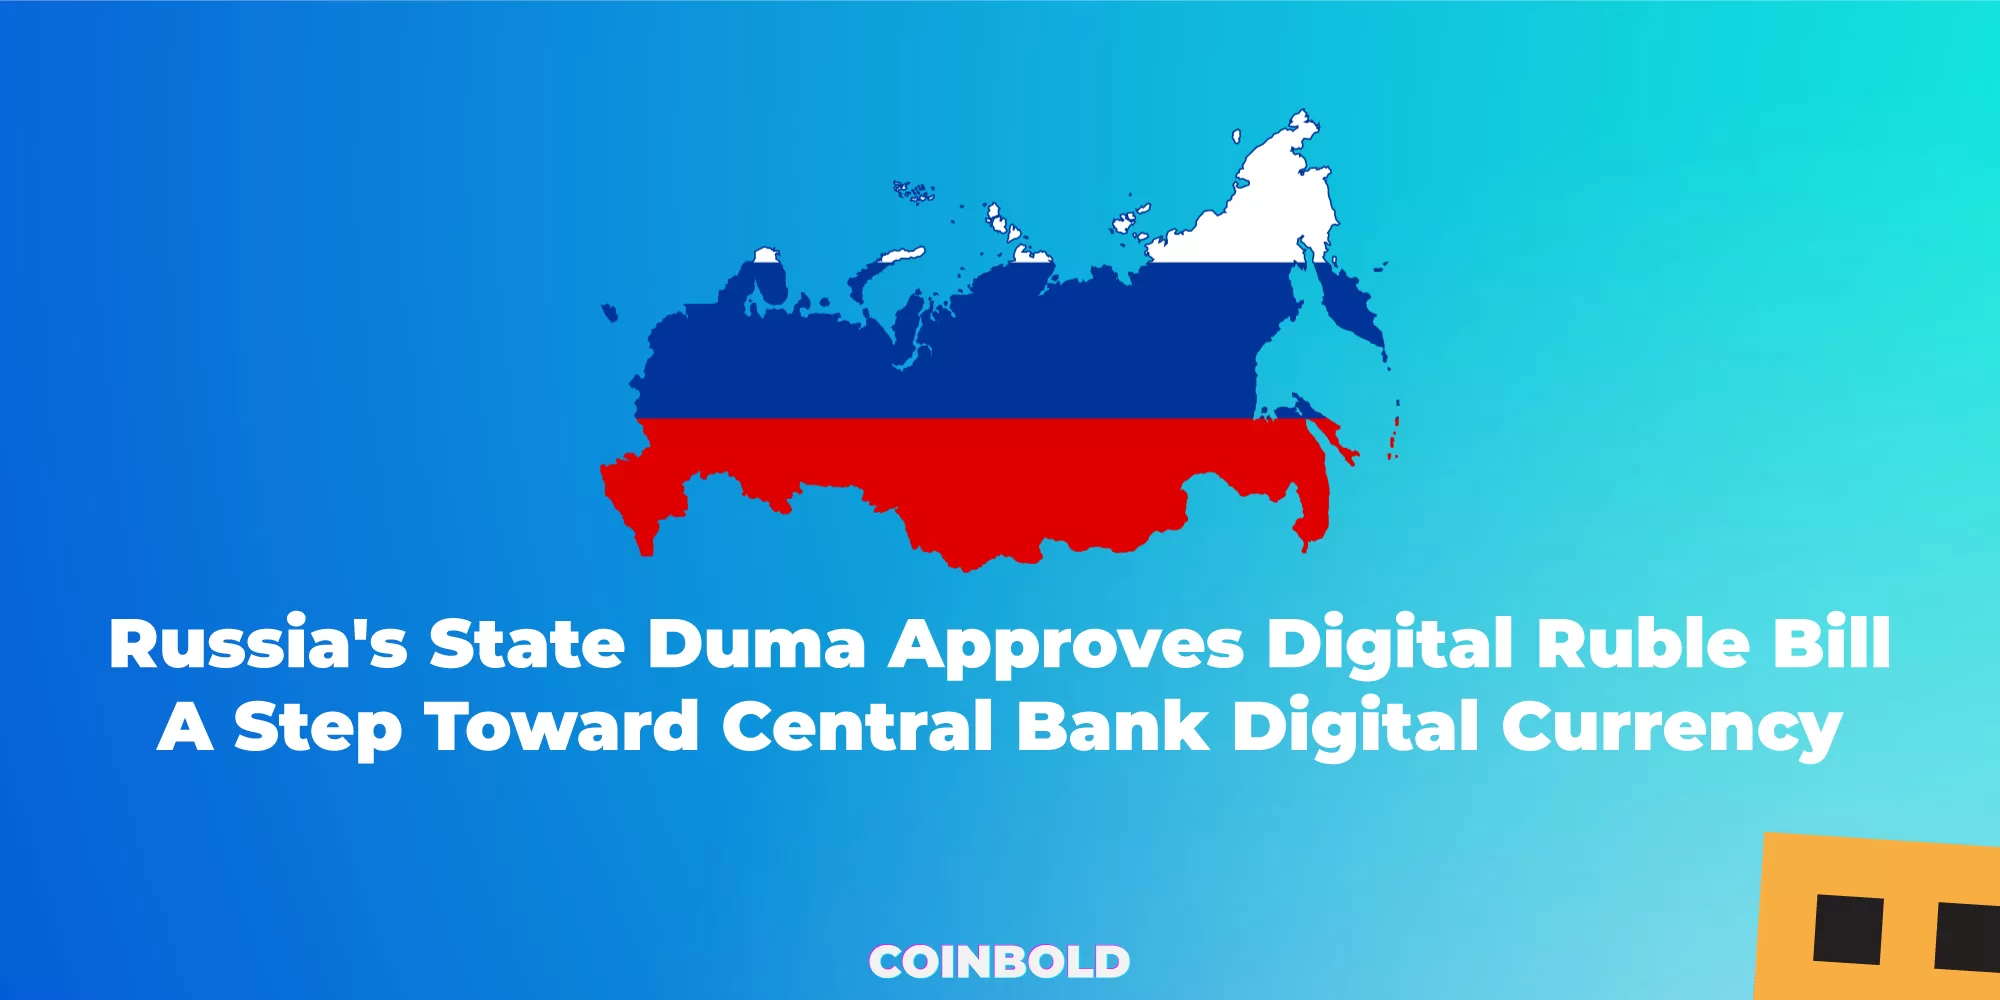 Russia's State Duma Approves Digital Ruble Bill: A Step Toward Central Bank Digital Currency